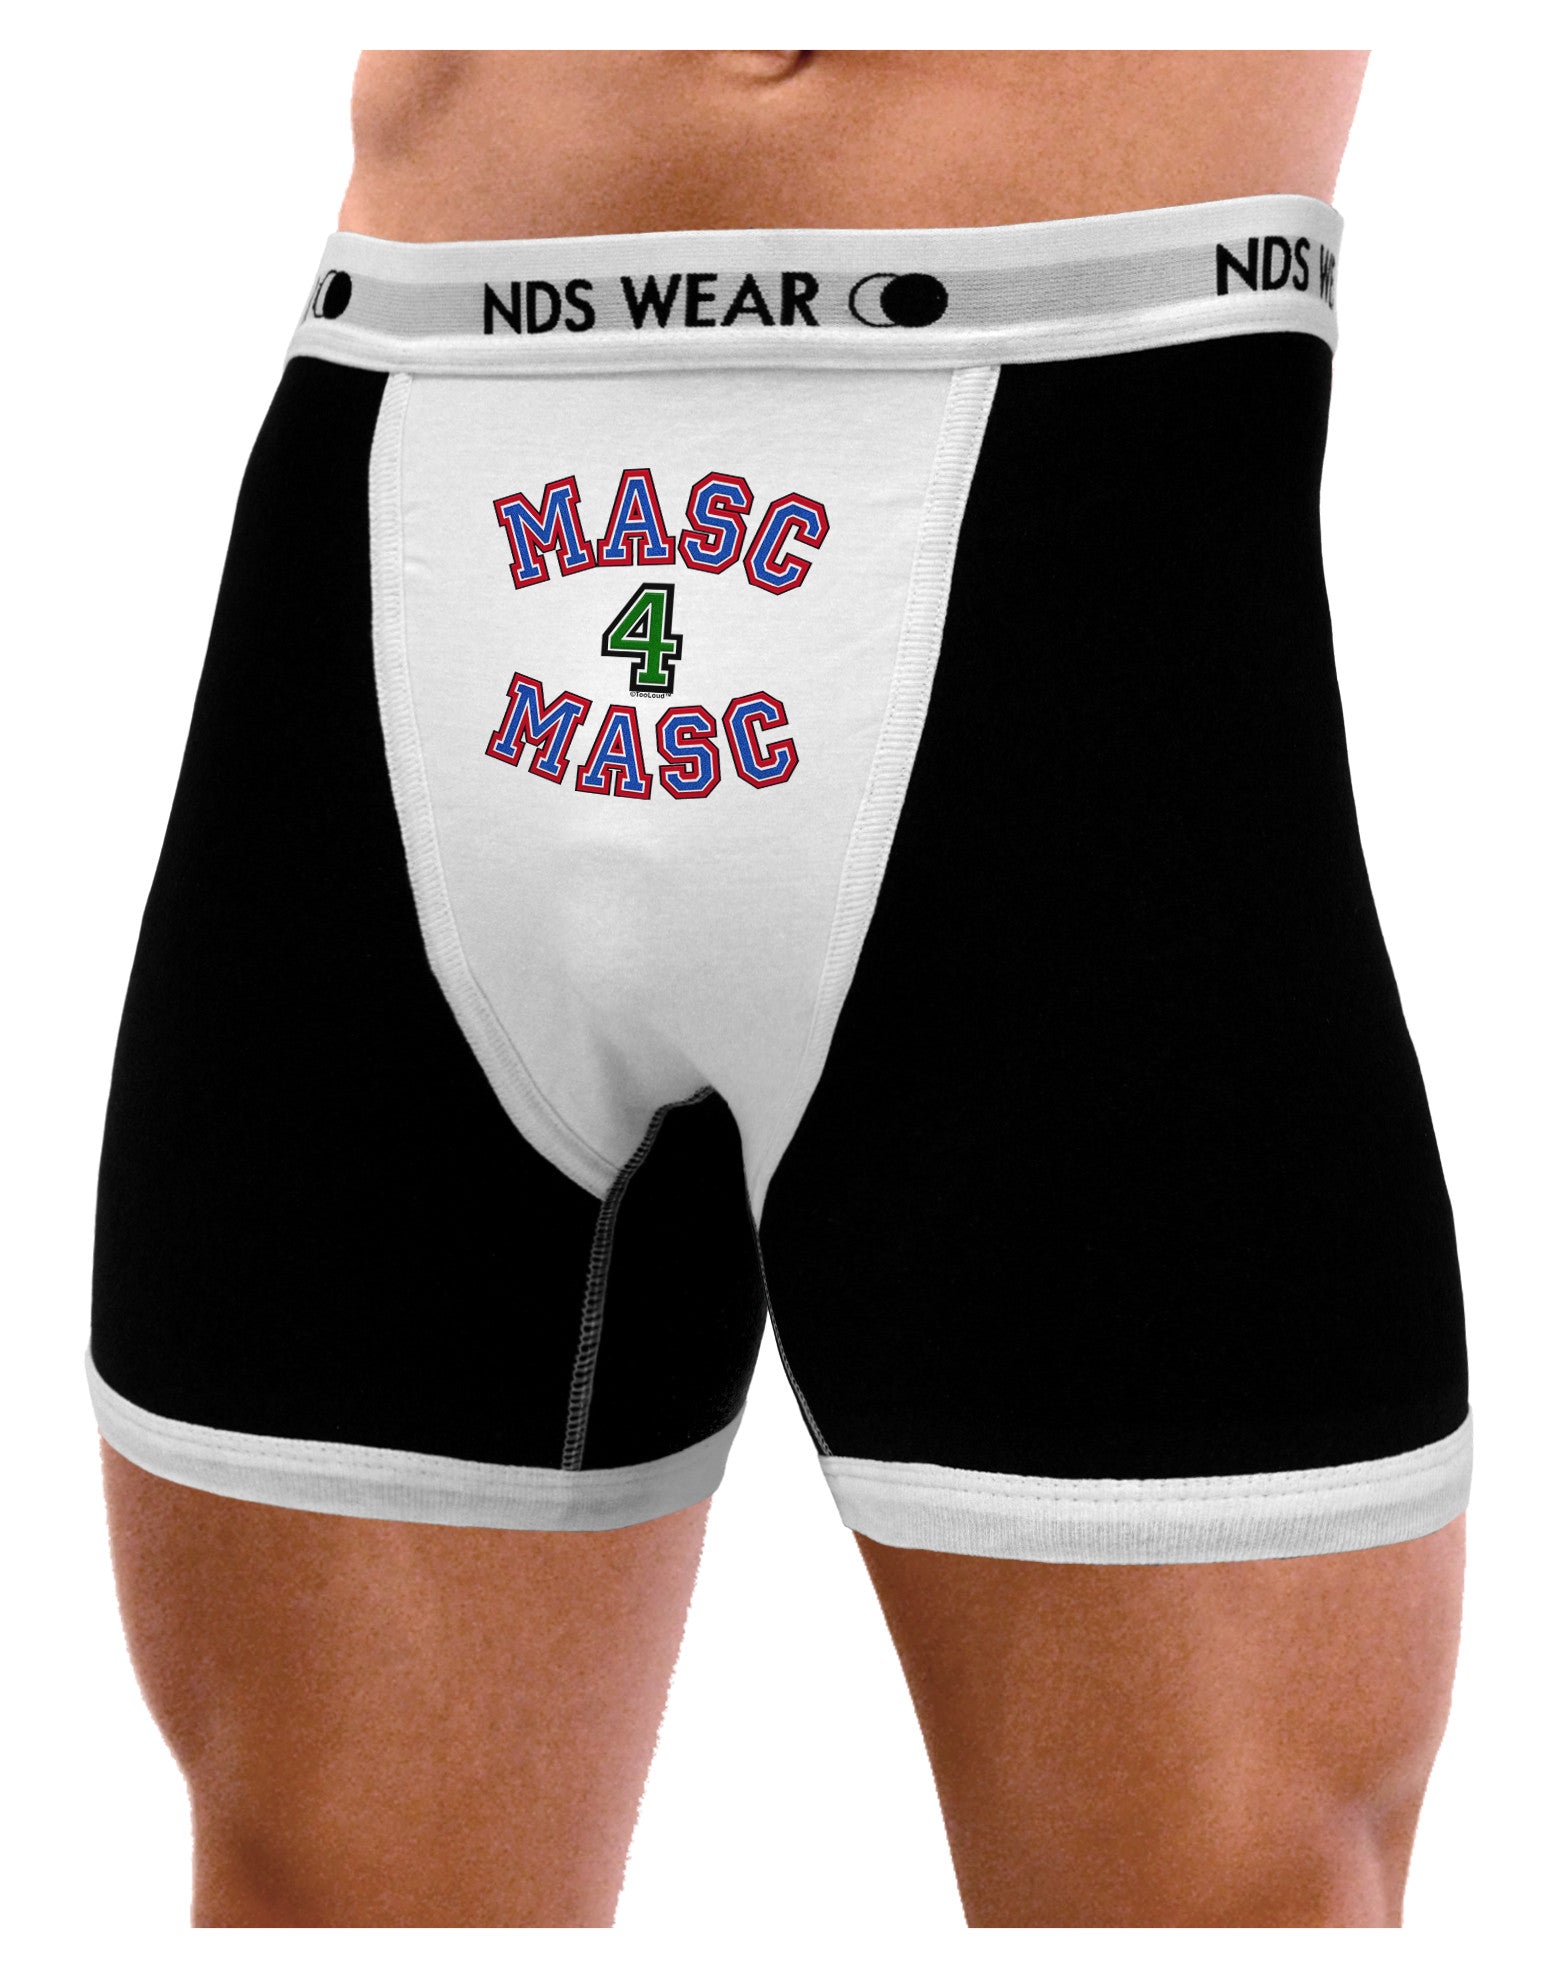 Masc 4 Masc College Stud Mens NDS Wear Boxer Brief Underwear by NDS Wear